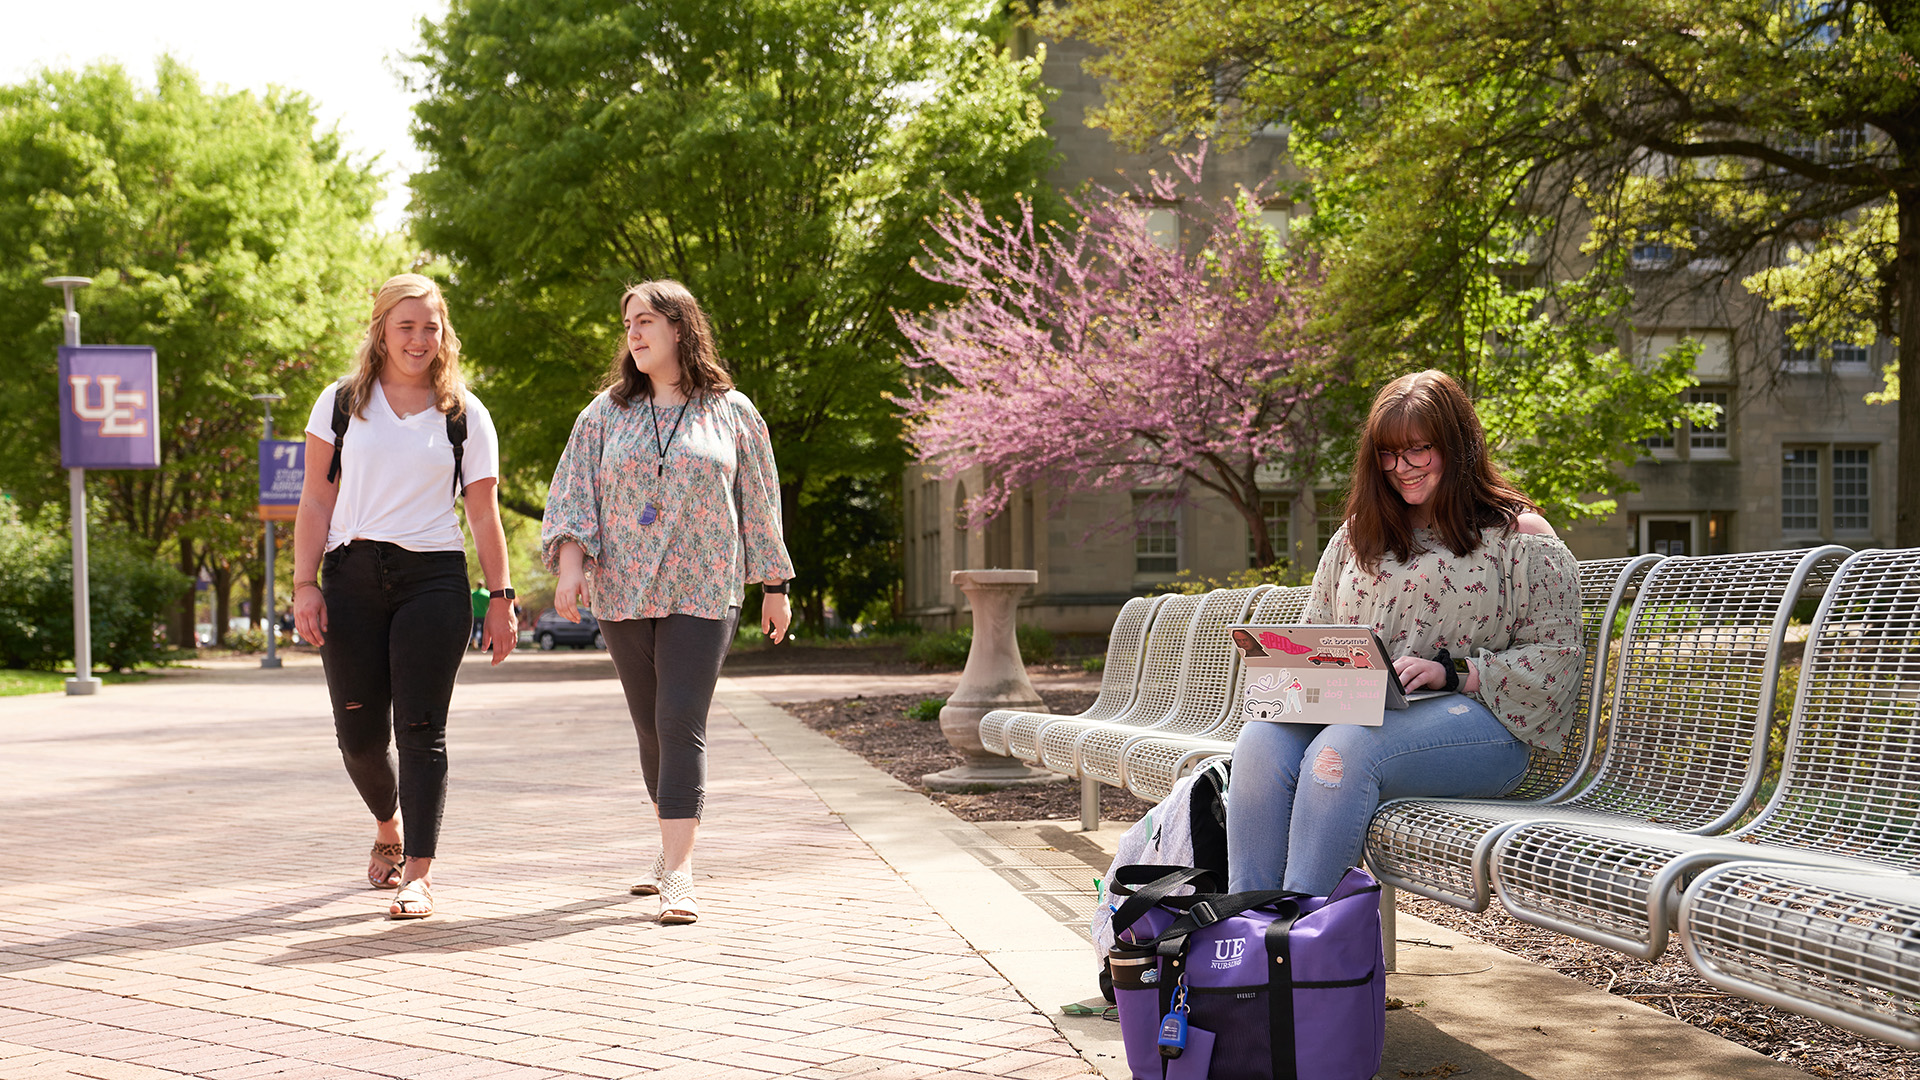 Women on campus walking and sitting